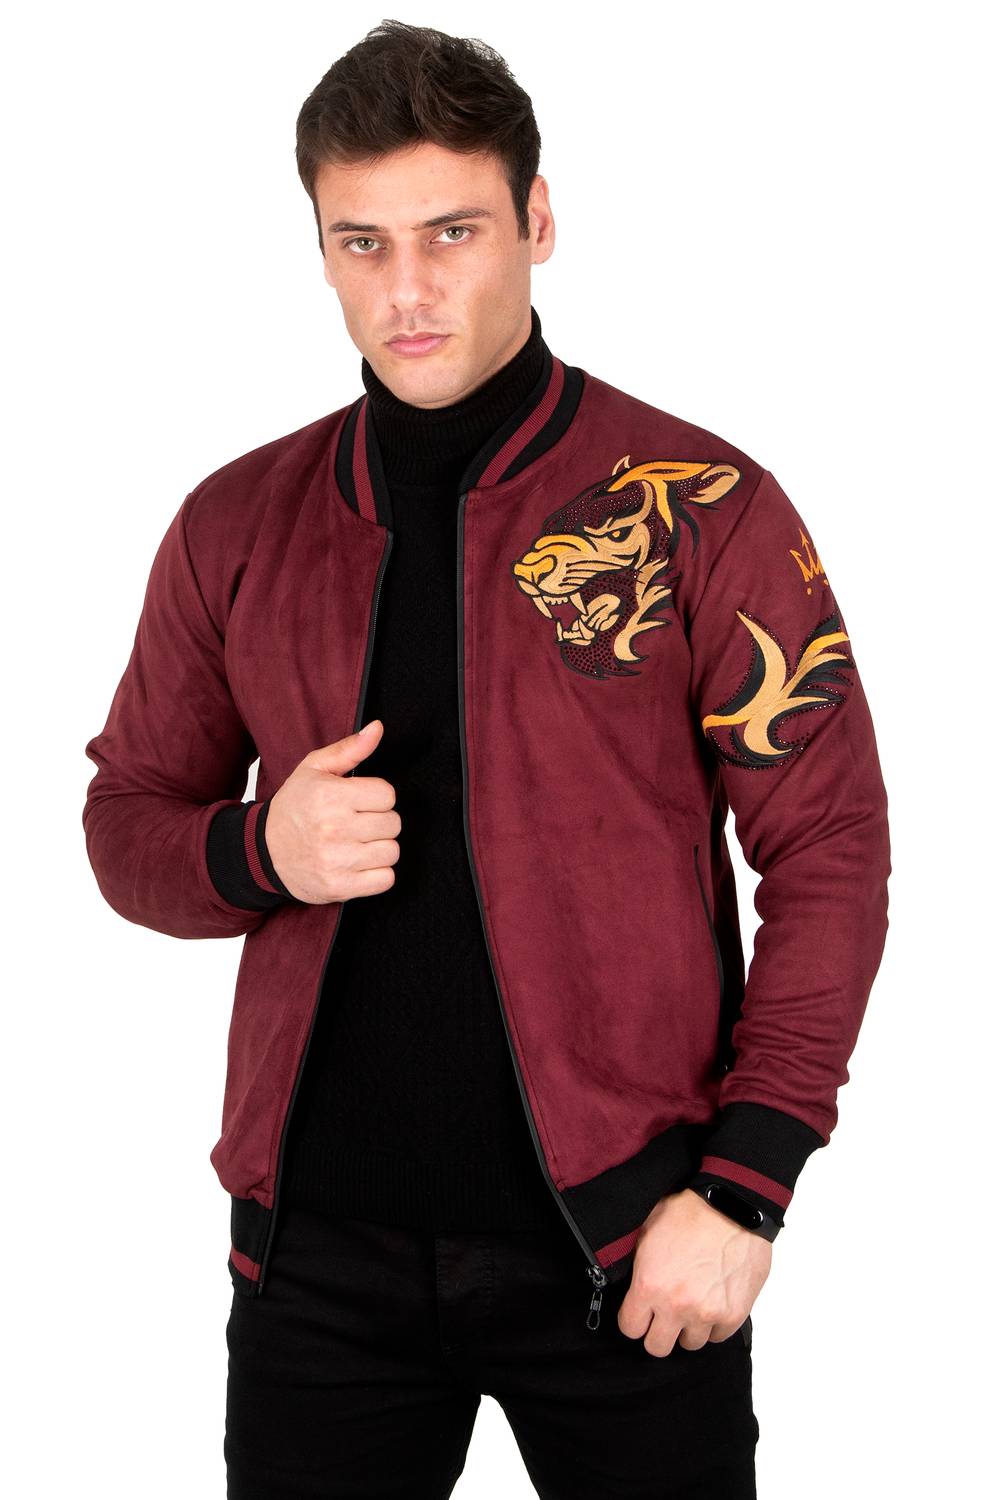 DeepSEA Patterned Stone Embroidered Zipper Detailed College Coat 23020436